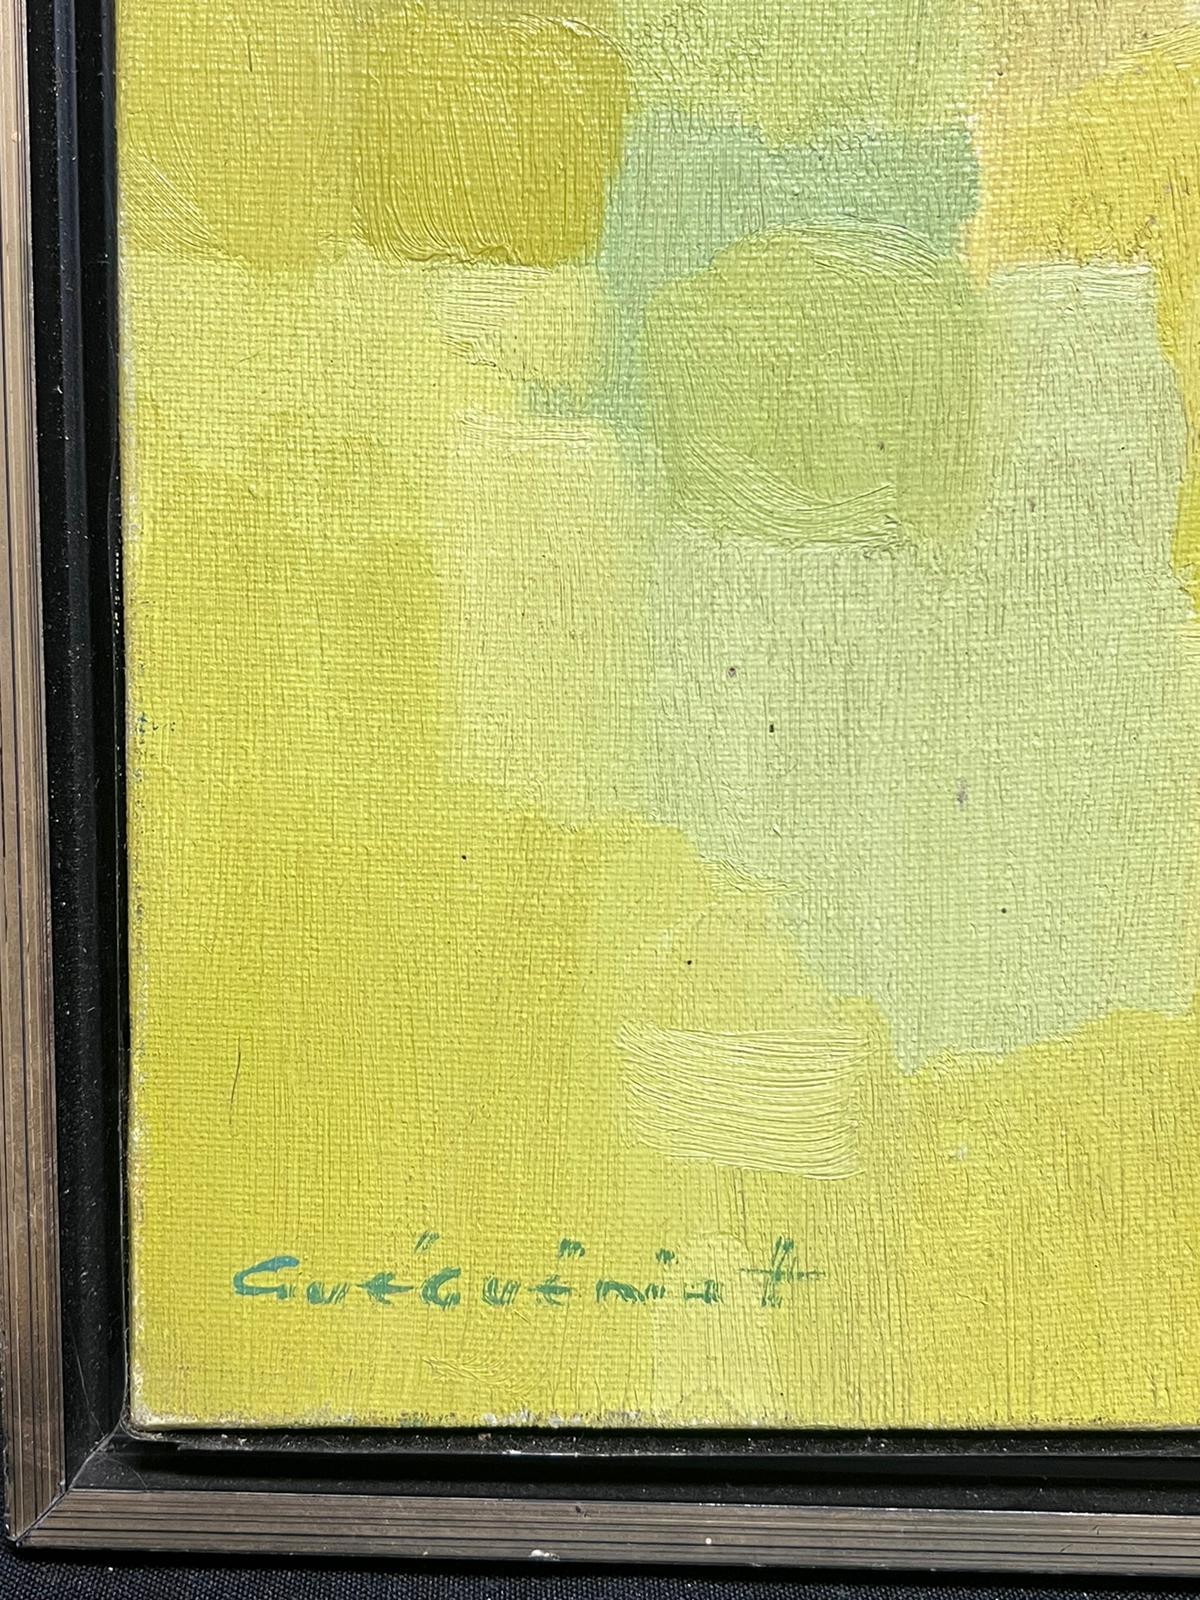 Abstract Expressionist Sky Composition
by Gerard Guegueniat (French 1970's)
signed oil painting on canvas, framed
framed: 18 x 11 inches
canvas: 16 x 9.5 inches
provenance: private collection, France
condition: very good and sound condition 

Gérard